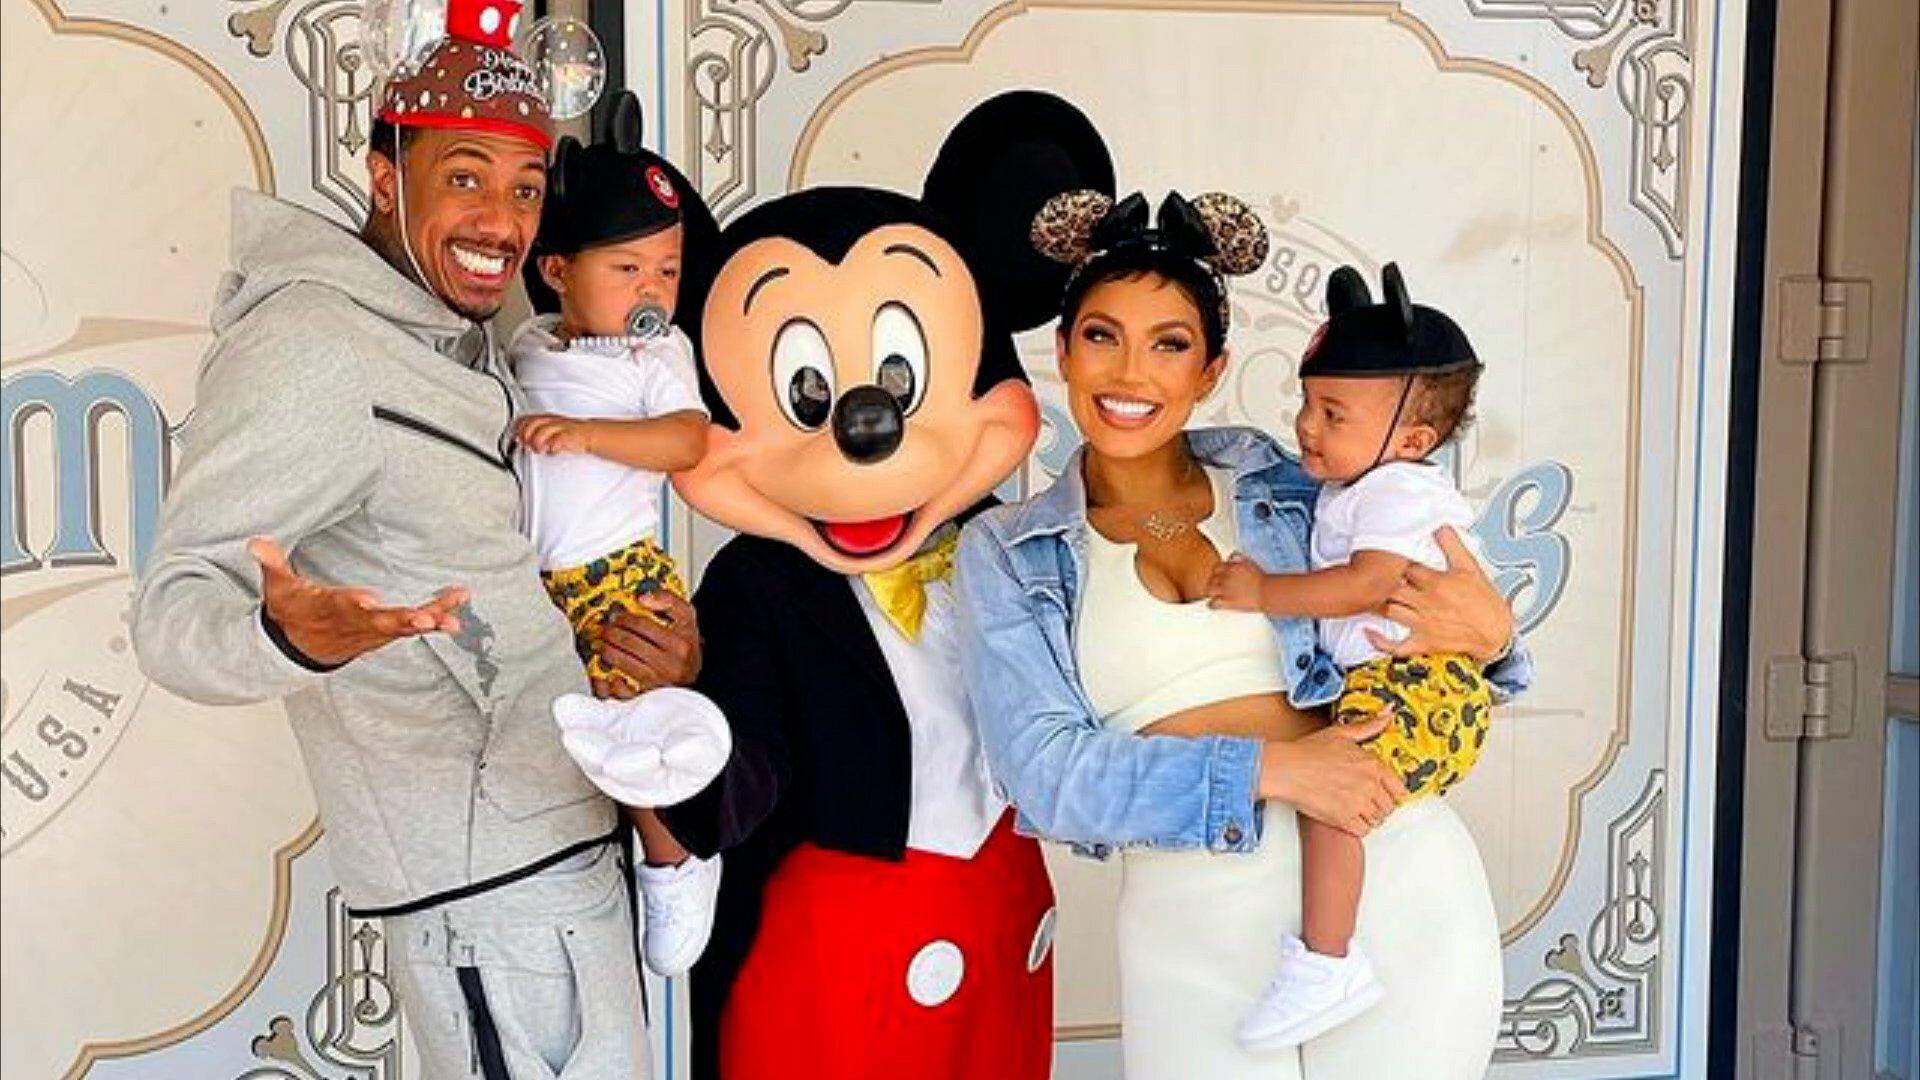 Alyssa Scott Announces Pregnancy After Loss Of Son With Nick Cannon